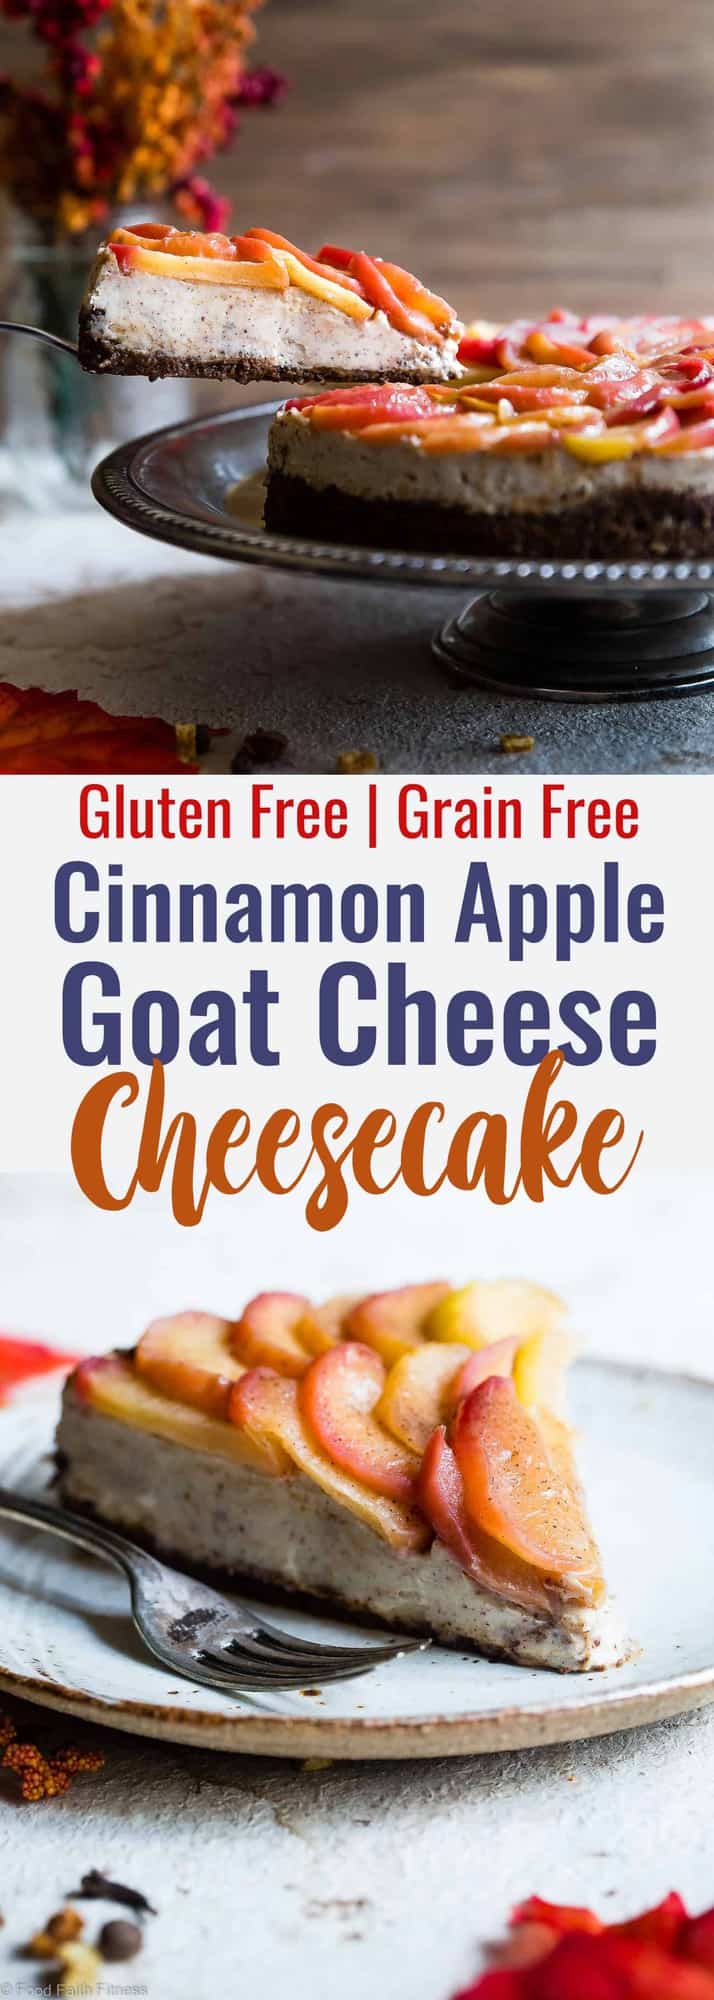 Honey Apple Goat Cheese Cheesecake - This creamy cheesecake is topped with cinnamon honey apples and is perfectly sweet and a little bit tangy! Gluten free, grain free and made with Greek yogurt to keep it light! My husband said it's the best dessert he has ever had! | #Foodfaithfitness | #Glutenfree #Cheesecake #Grainfree #Healthy #Goatcheese